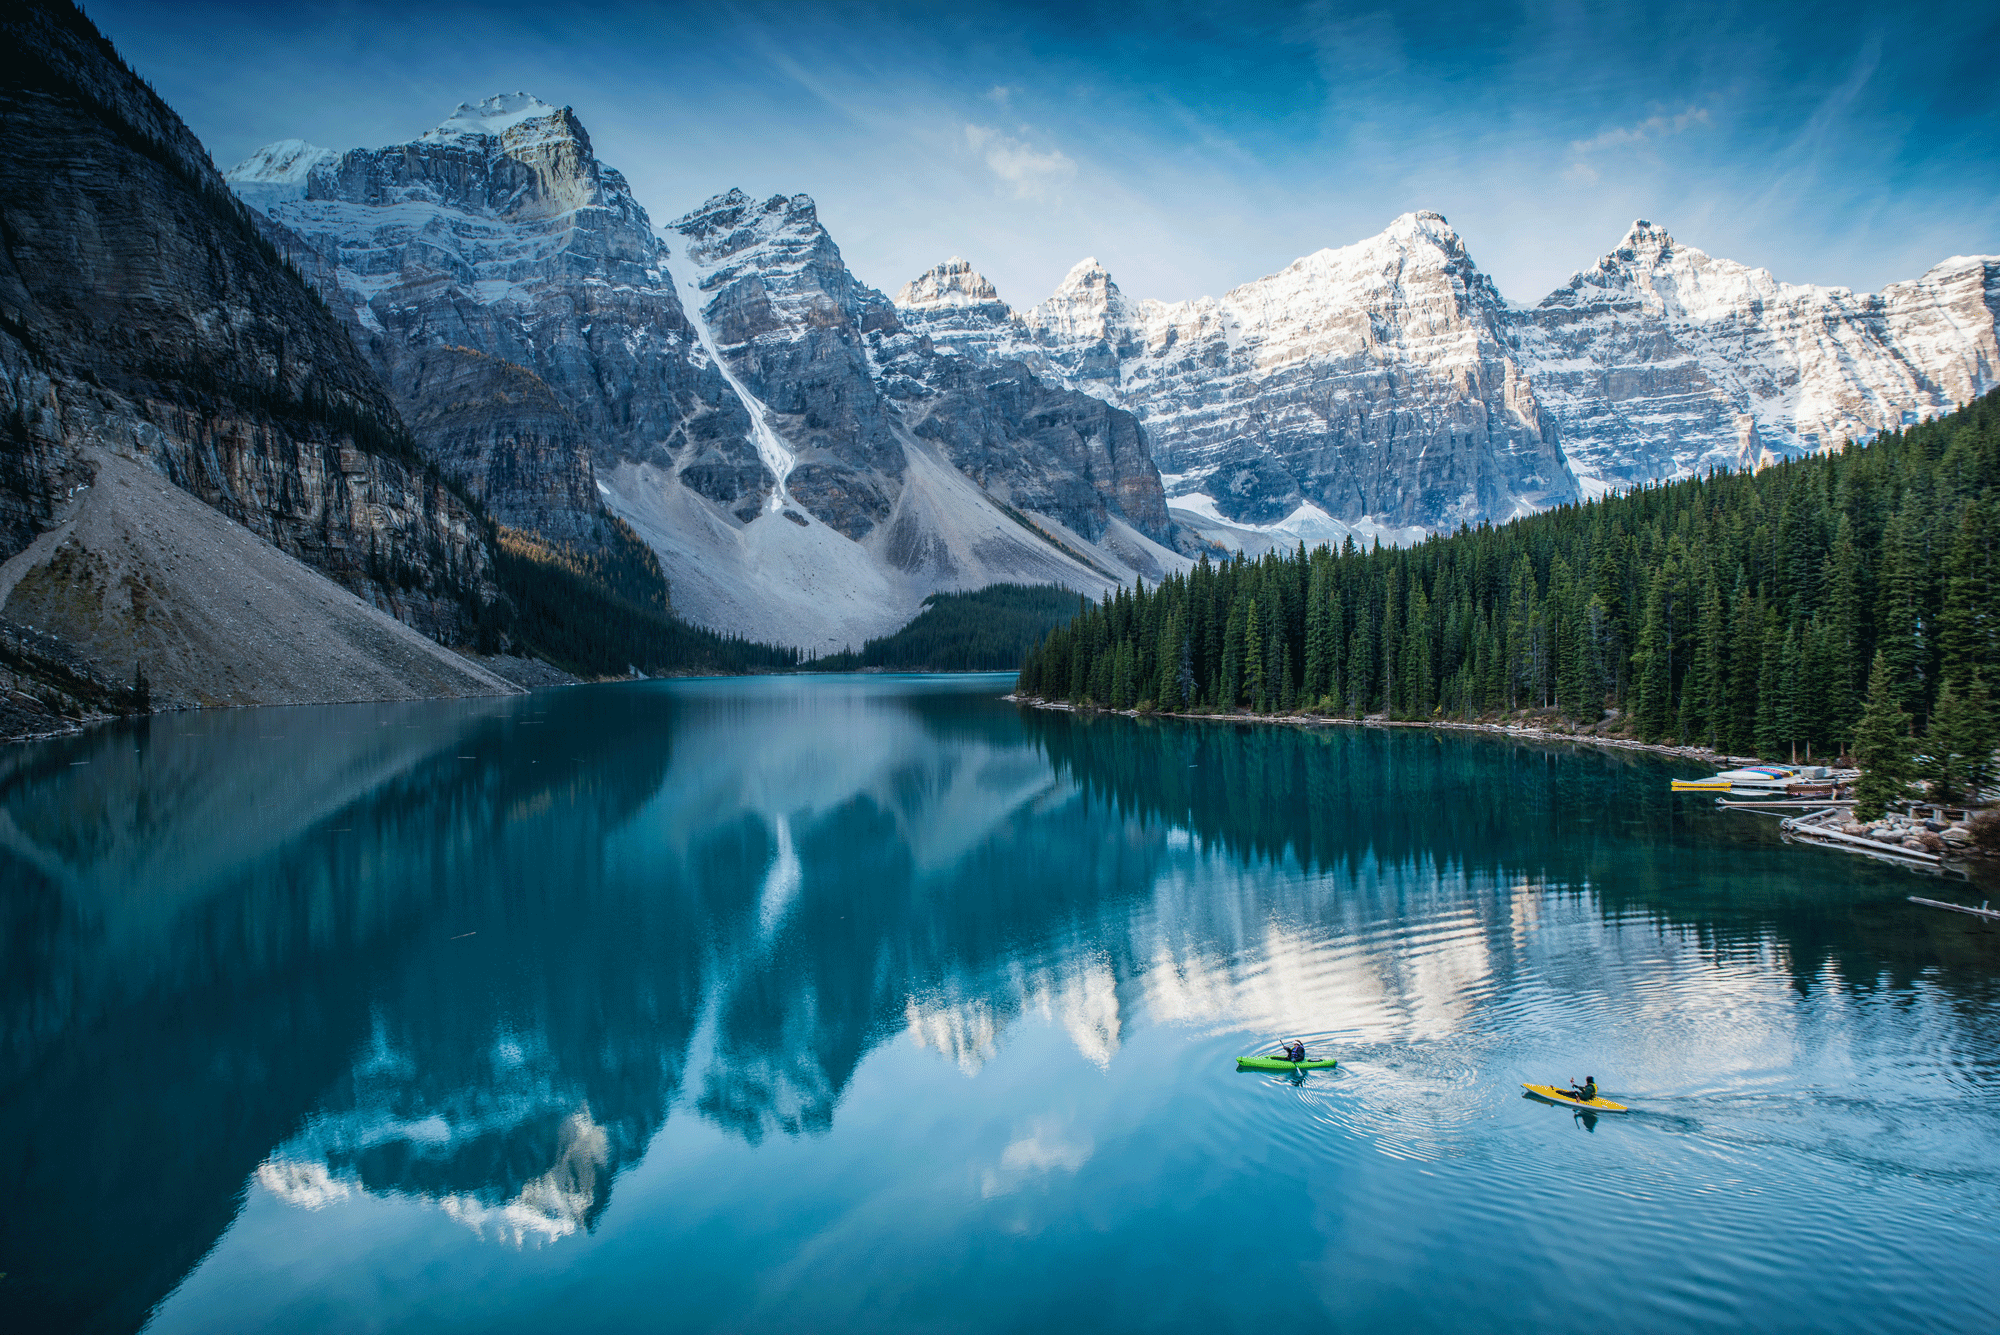 Canoers on a pictureque lake with a mountain backdrop